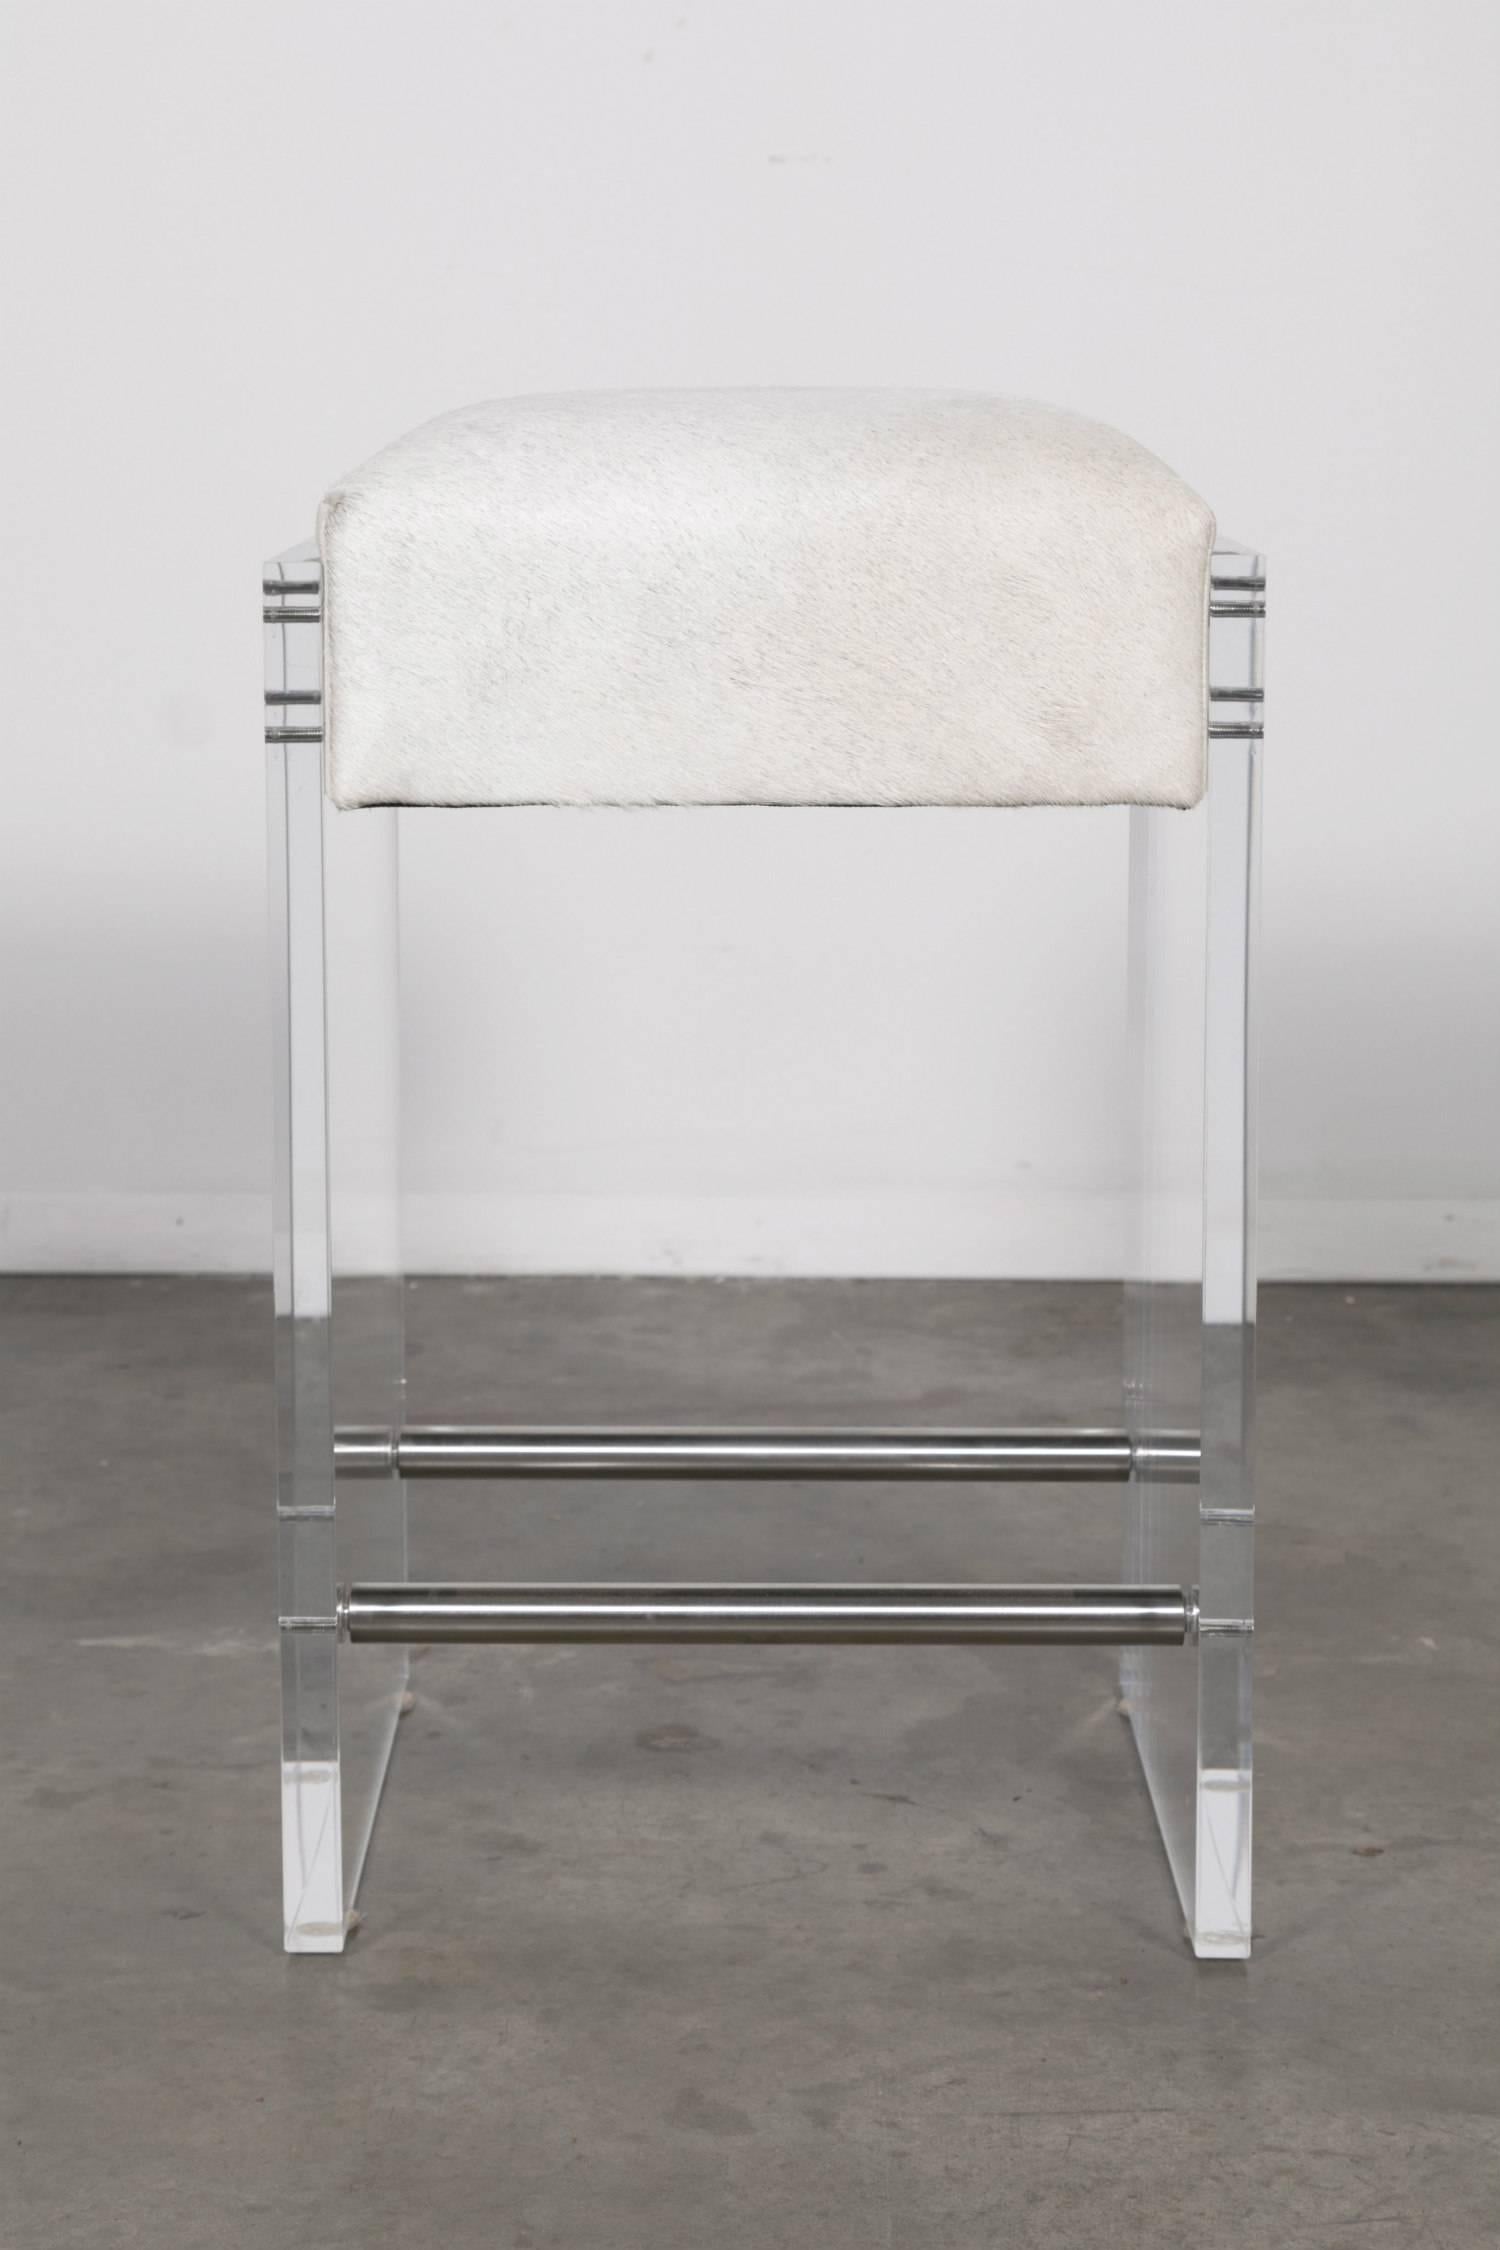 Gigi Lucite counter stool with two stainless foot rests. Add style and a touch of Hollywood Glam to your decor. Modern acrylic frame fastens to cowhide seat featuring cream faux leather sides with polished stainless steel fasteners. Counter stool